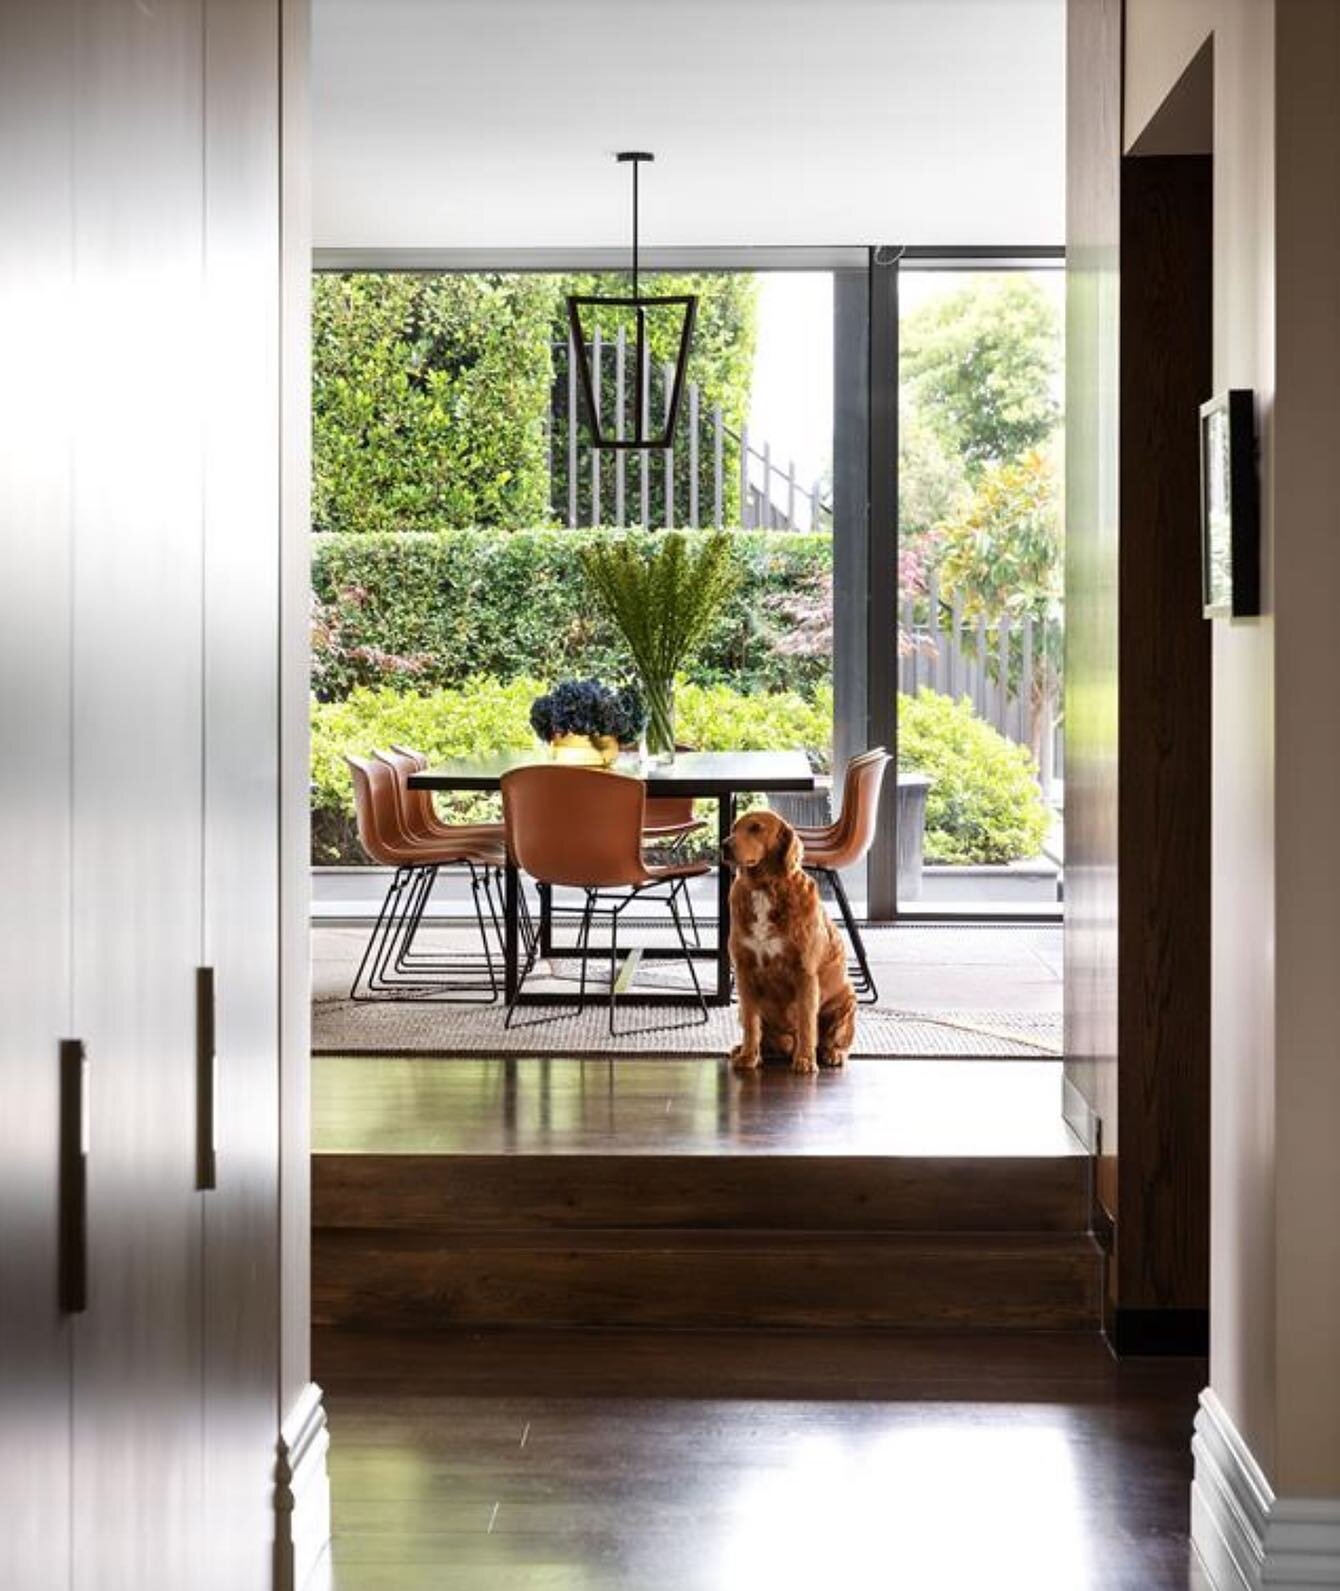 Through to the contemporary pavilion, and the magnificent garden by @melbournegardenscapes as the perfect backdrop. 
Featuring the very handsome Raffy!
Furniture, rugs &amp; lighting by @andinteriors 

Architect: @darrencarnellarchitects 
Builder: @s